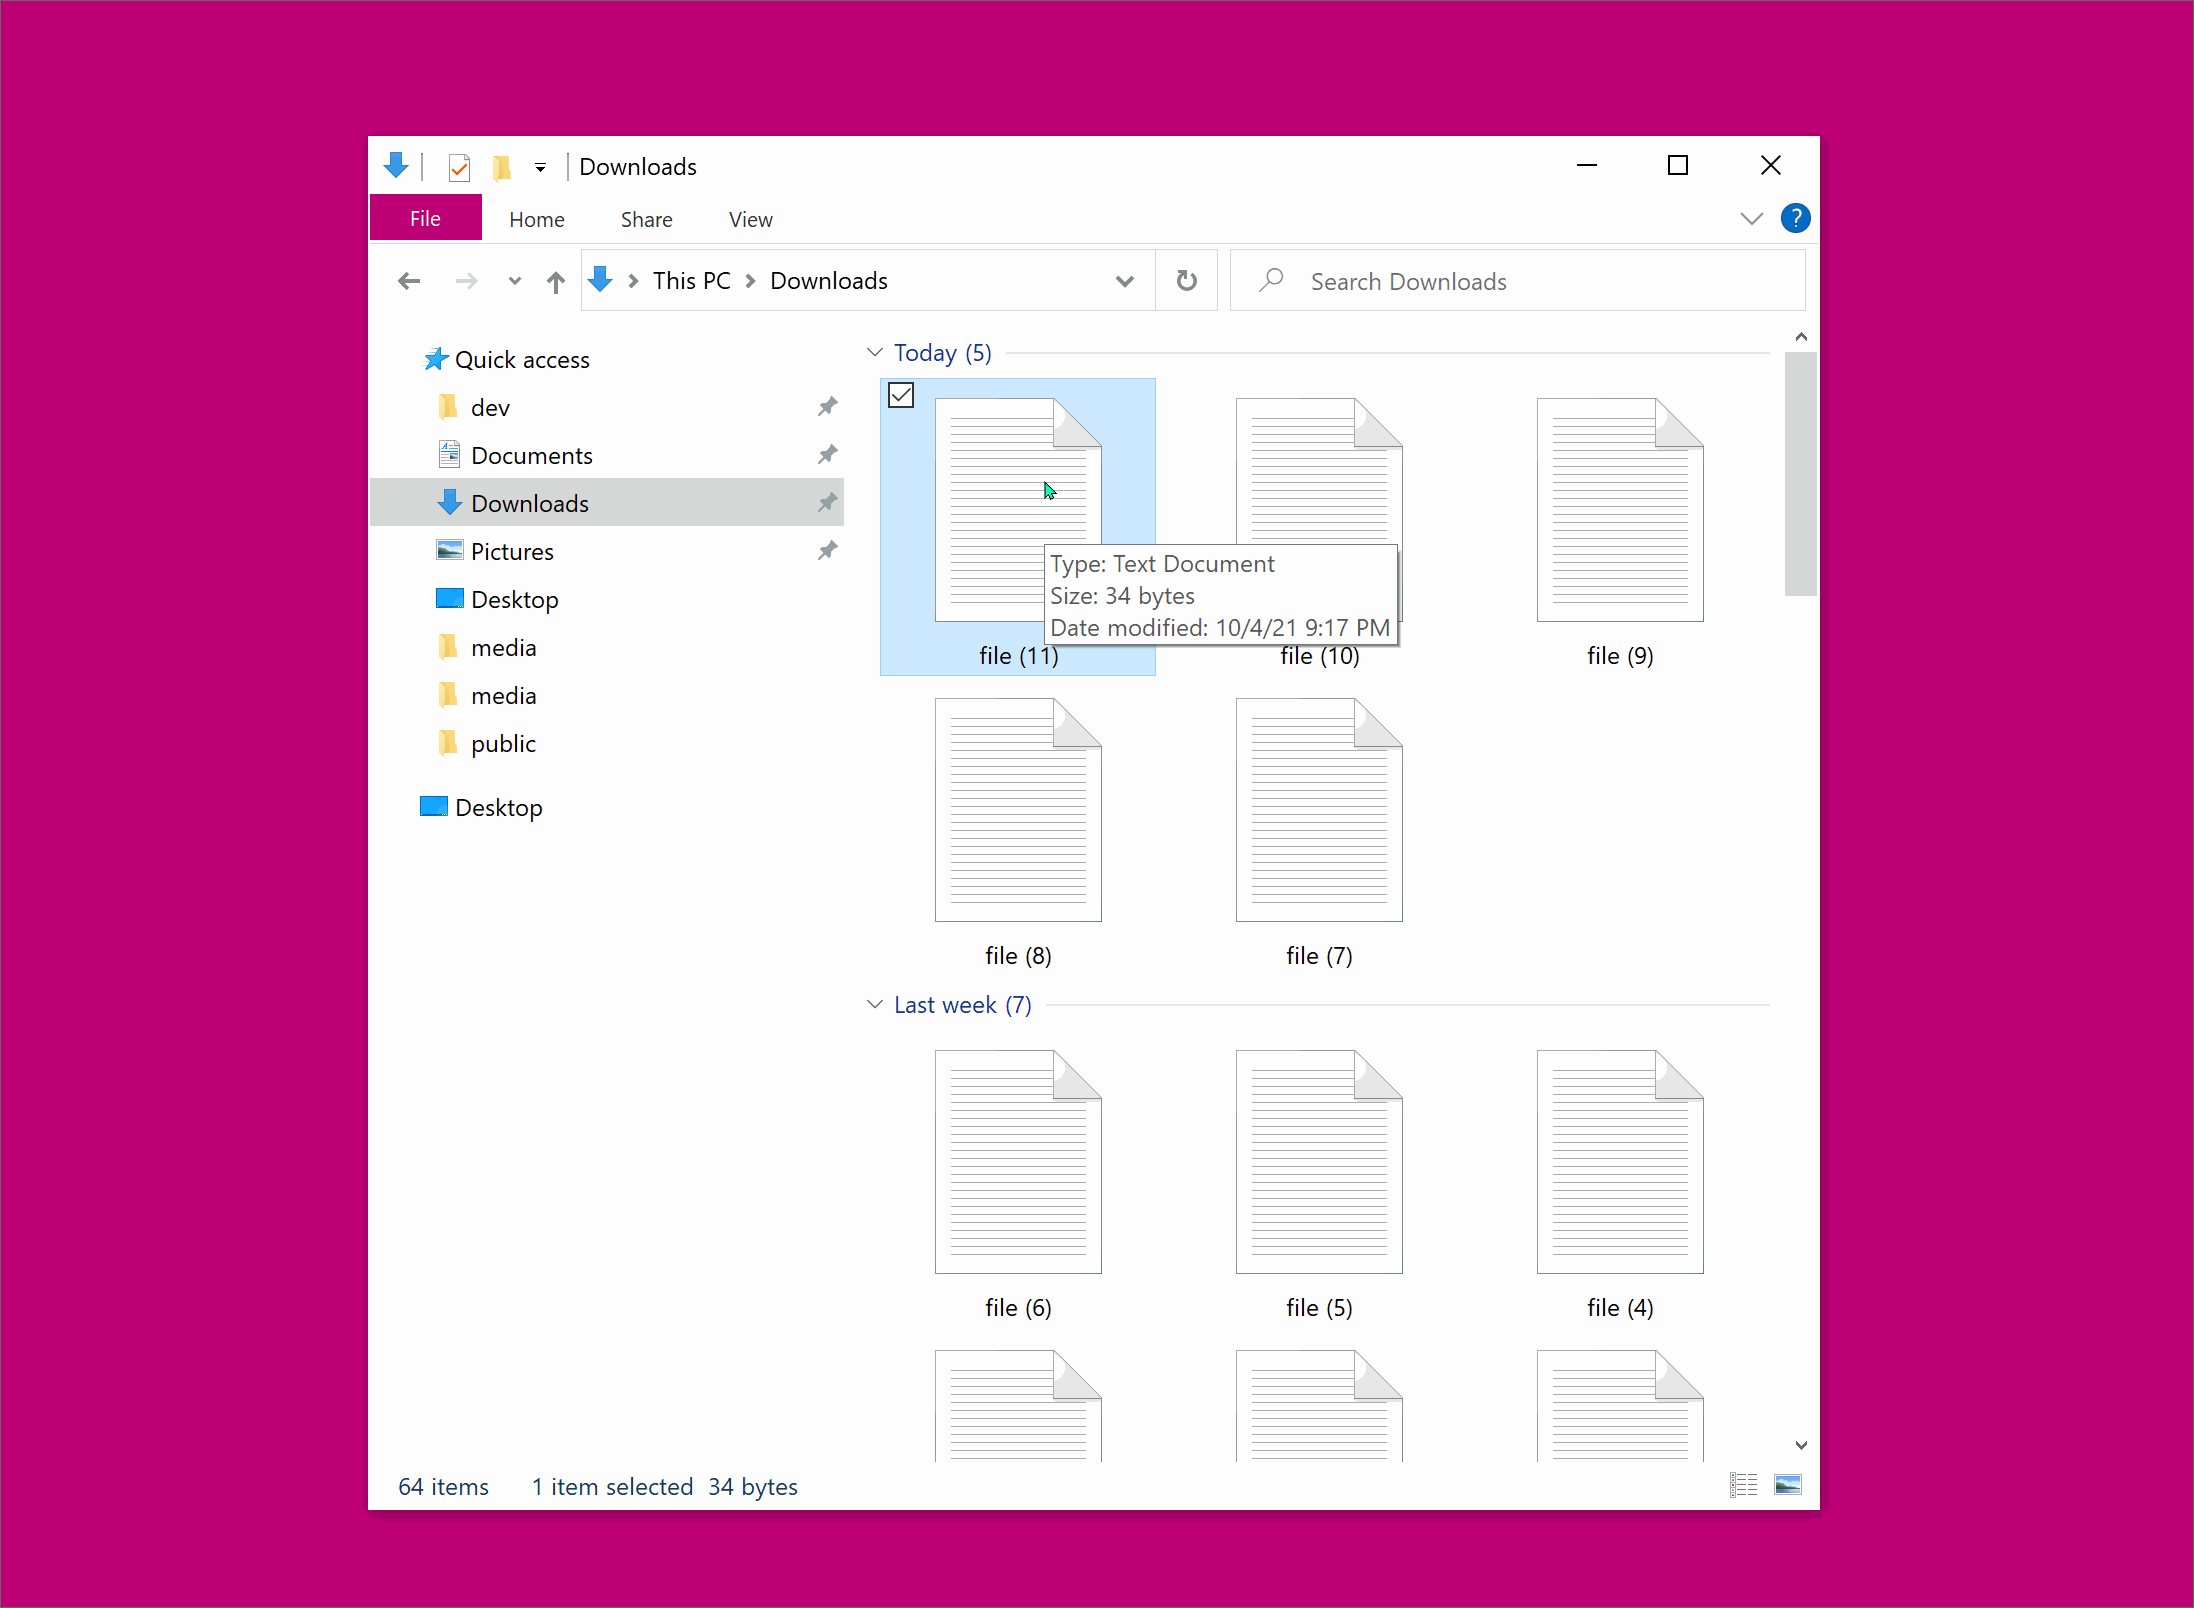 Animated screenshot showing sharing a file from the Windows explorer to the demo app installed as a PWA